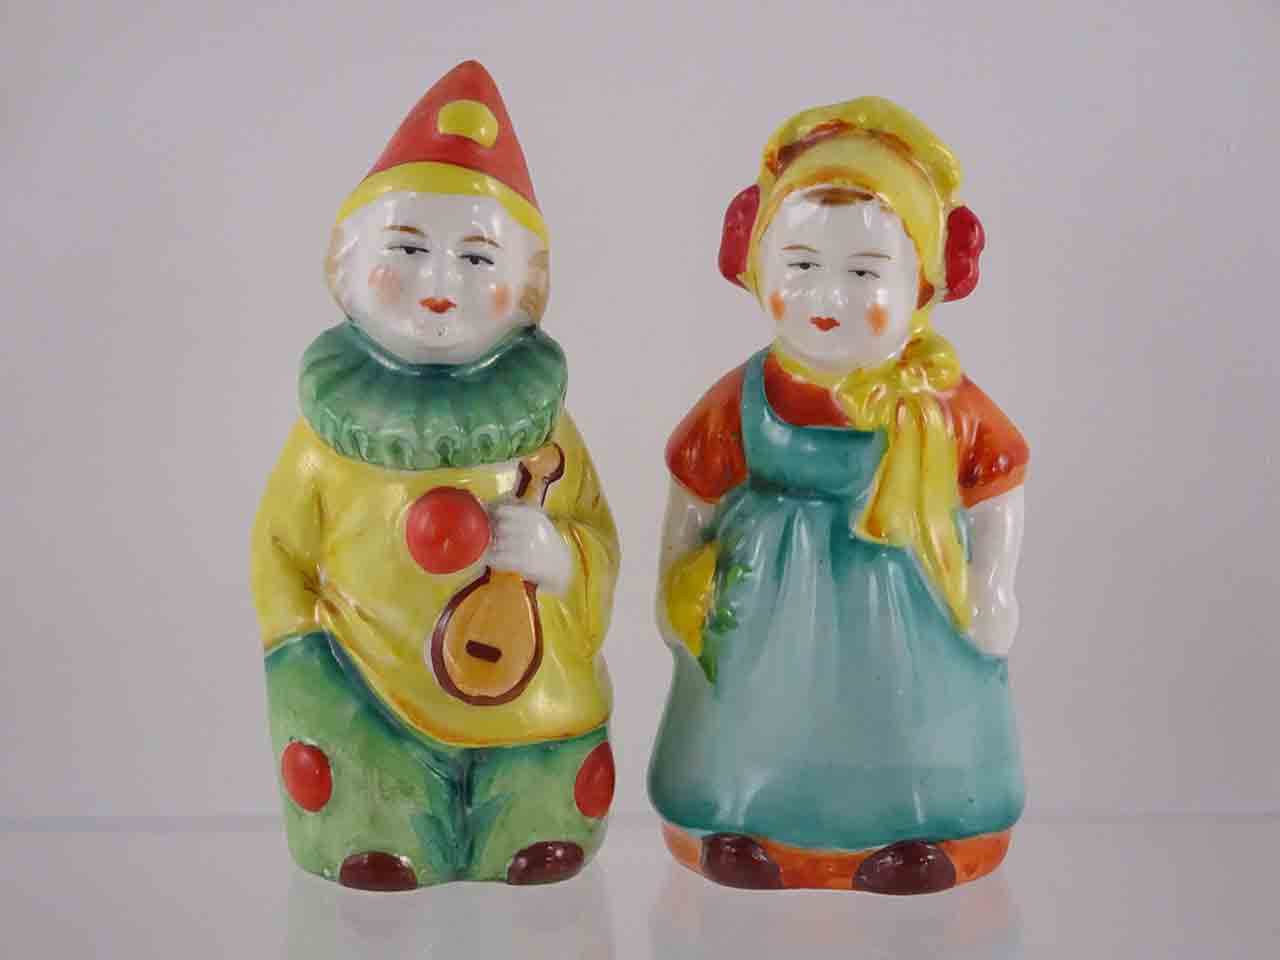 Clown and lady salt and pepper shakers